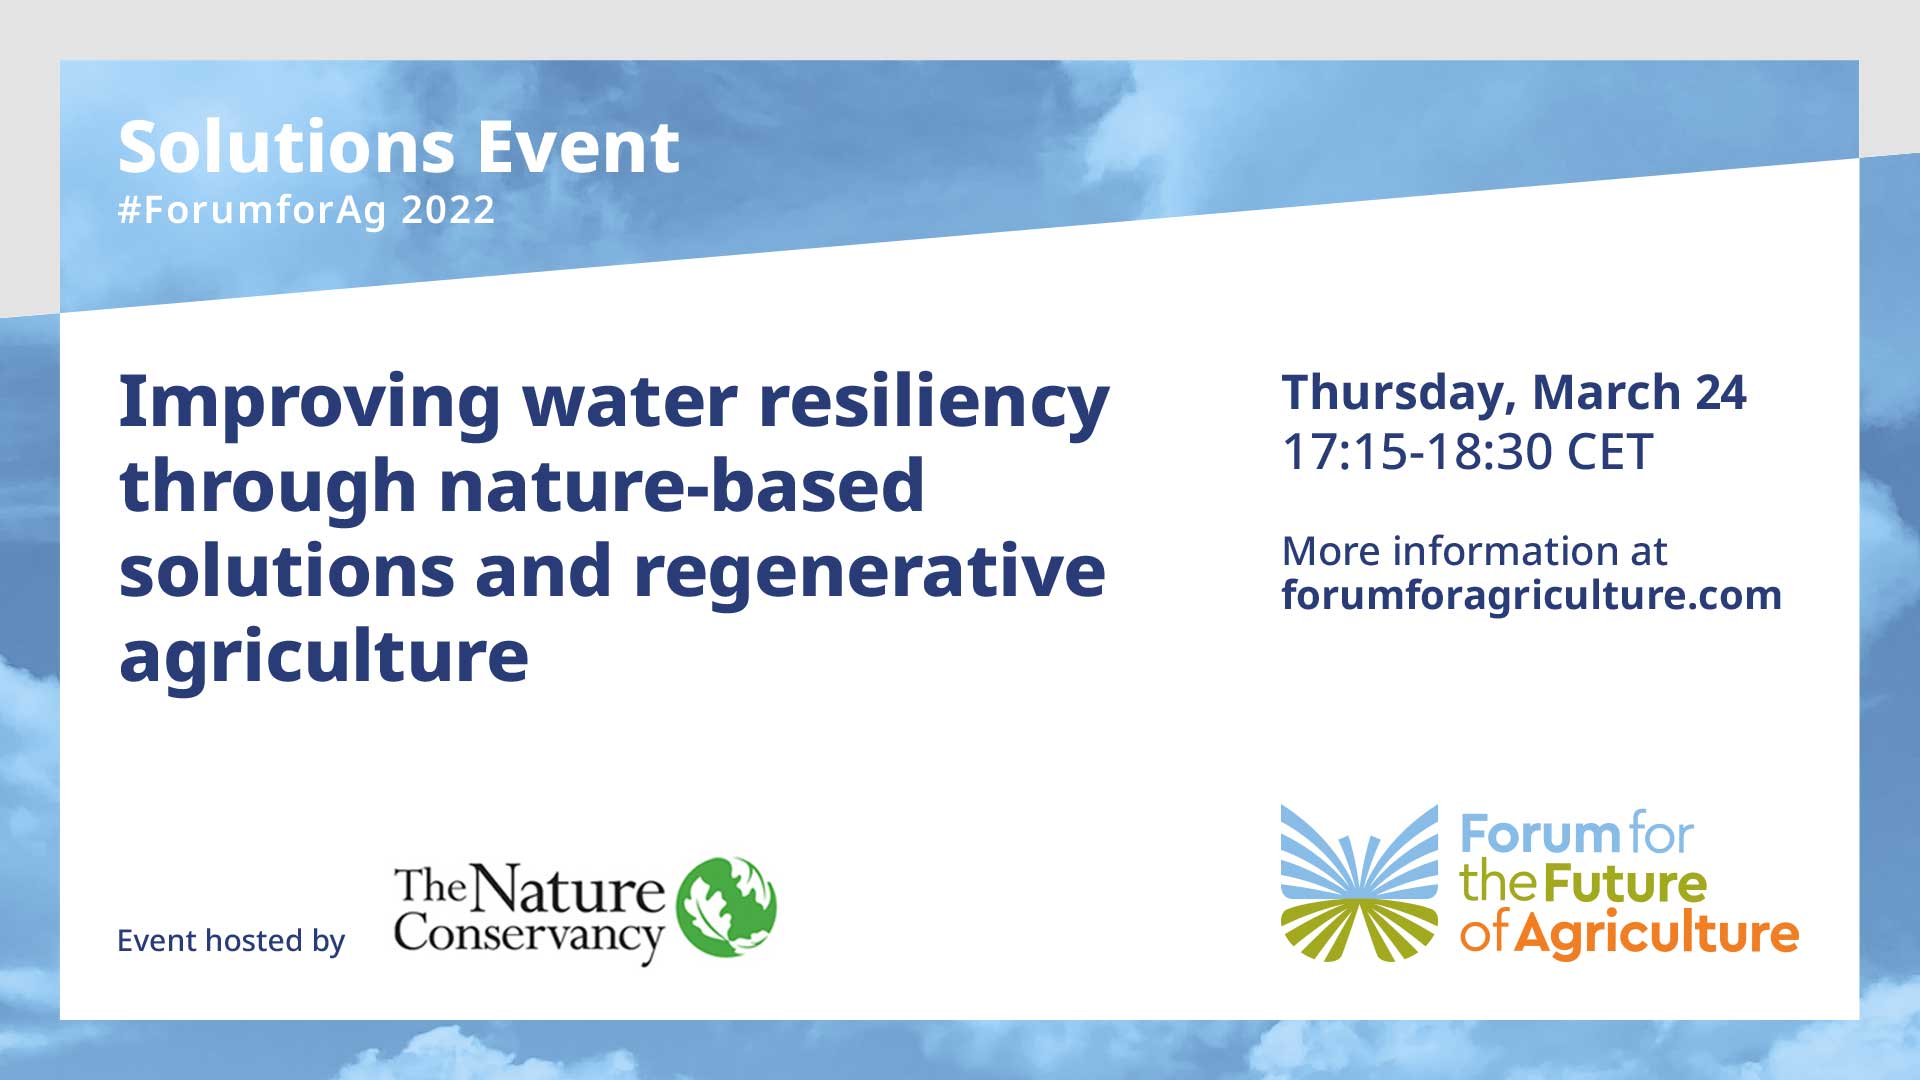 2022 ForumforAg | Solutions event 8 | Improving water resiliency through nature-based solutions and regenerative agriculture video iamge